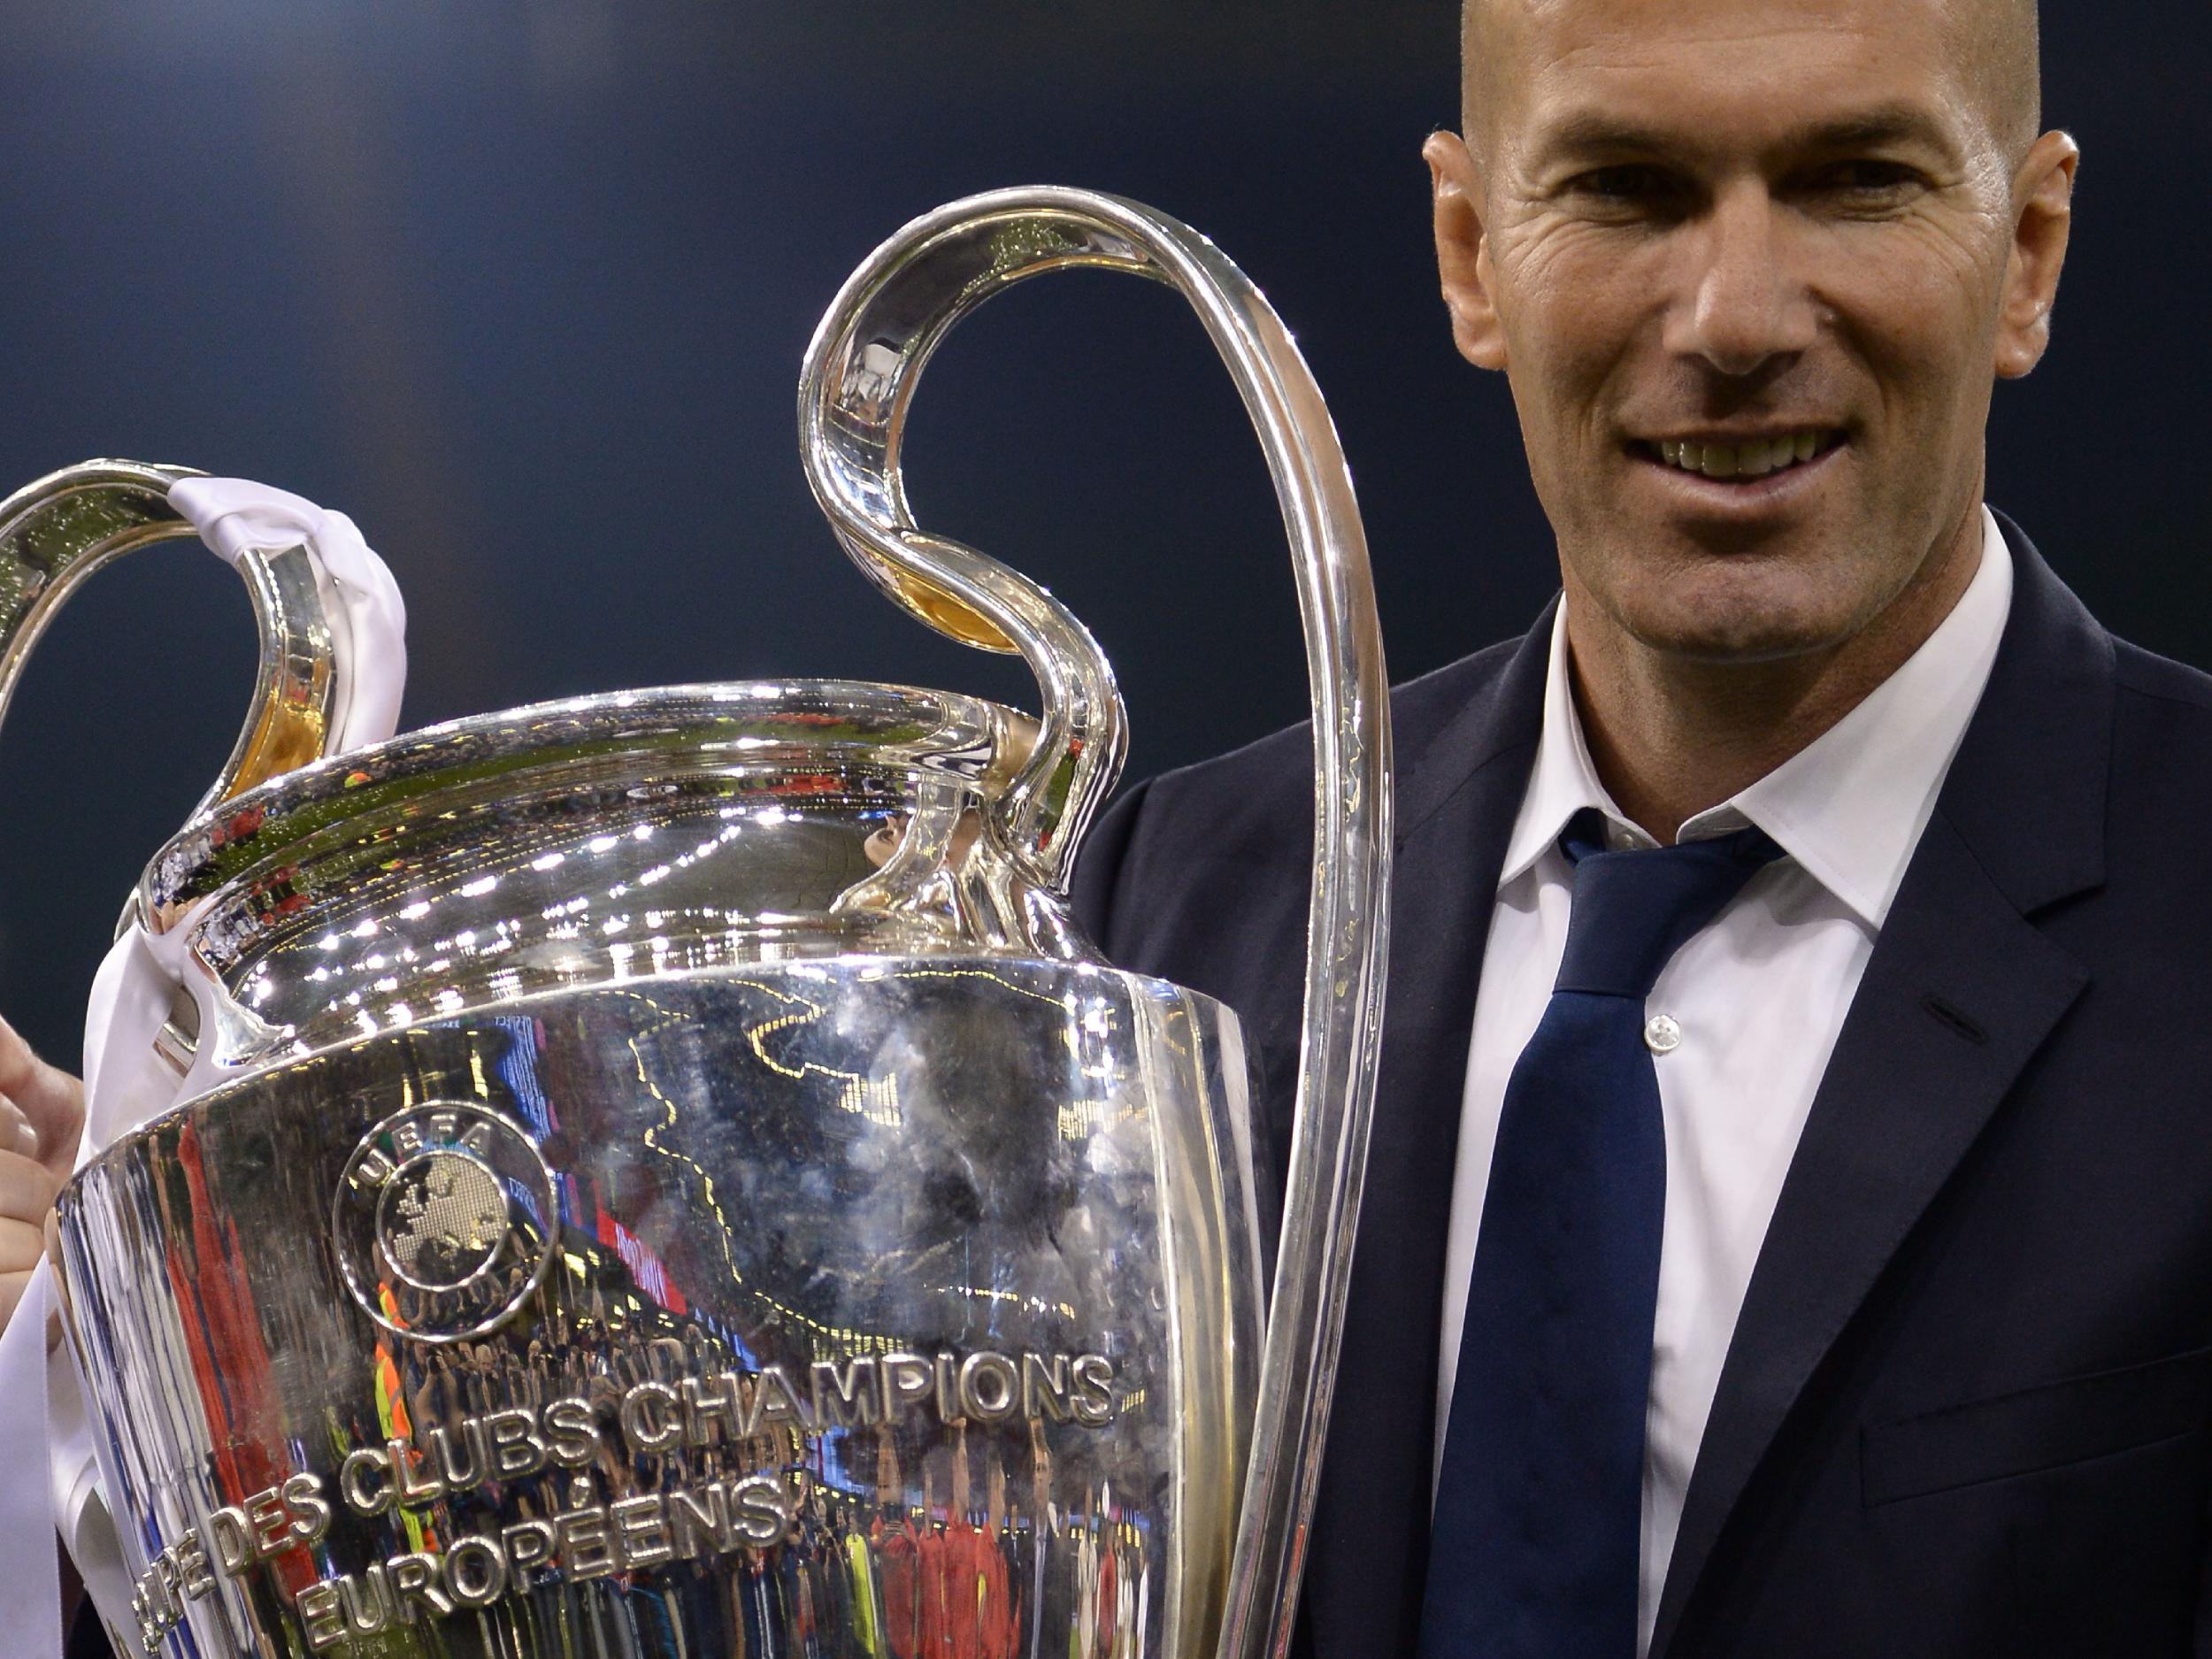 Zidane is the first manager to win back to back Champions League titles